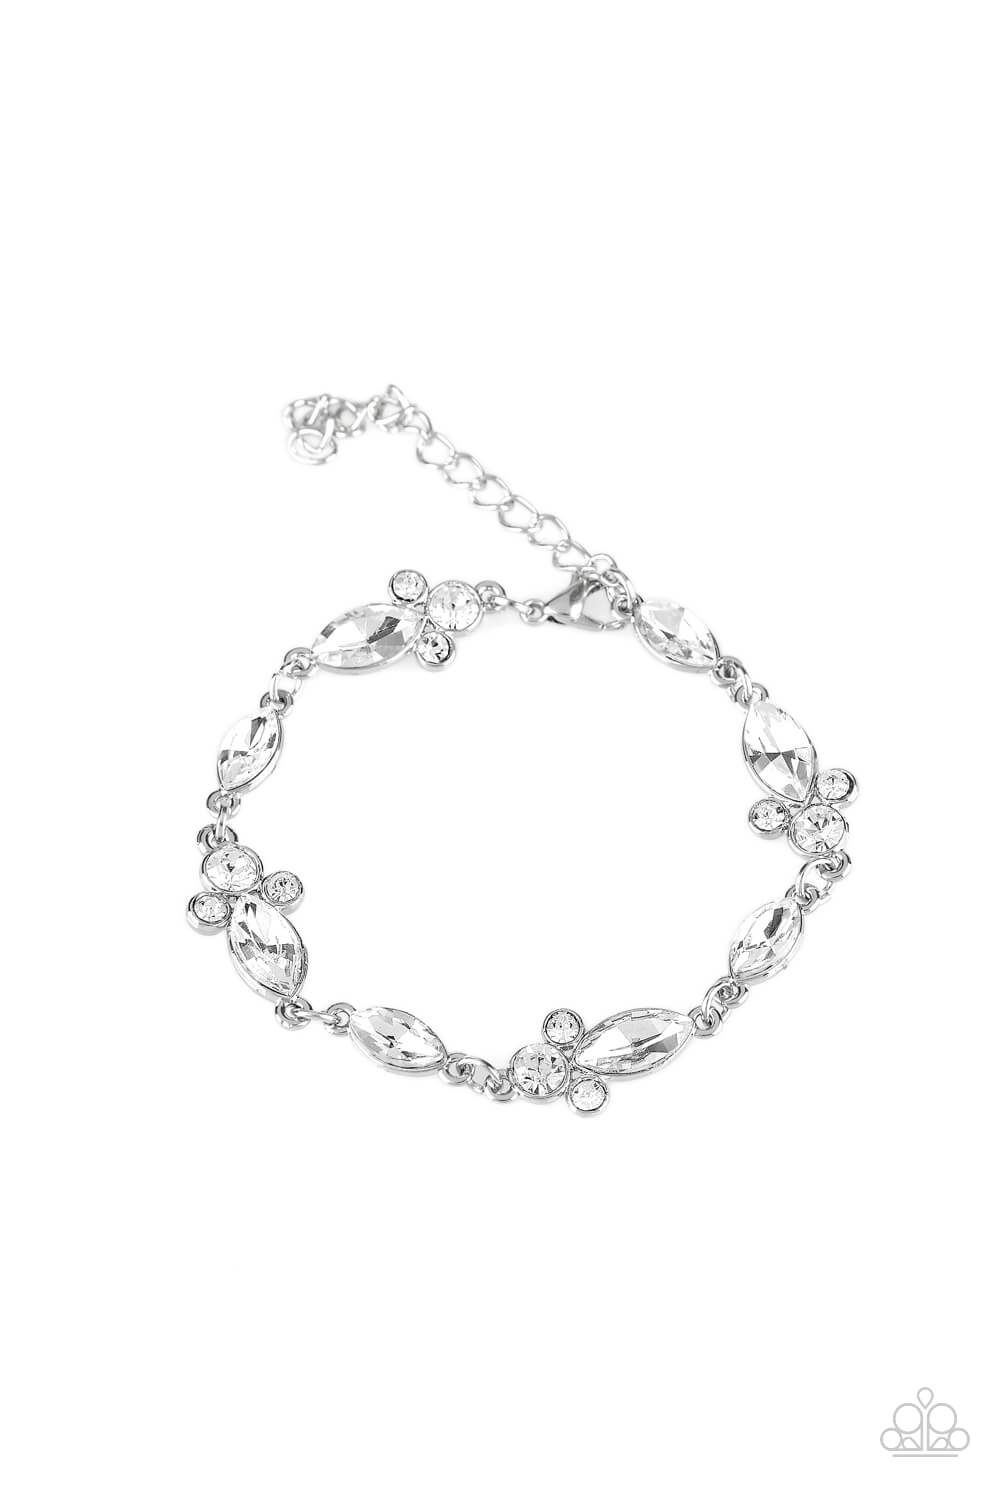 At Any Cost - White Bracelet - Princess Glam Shop